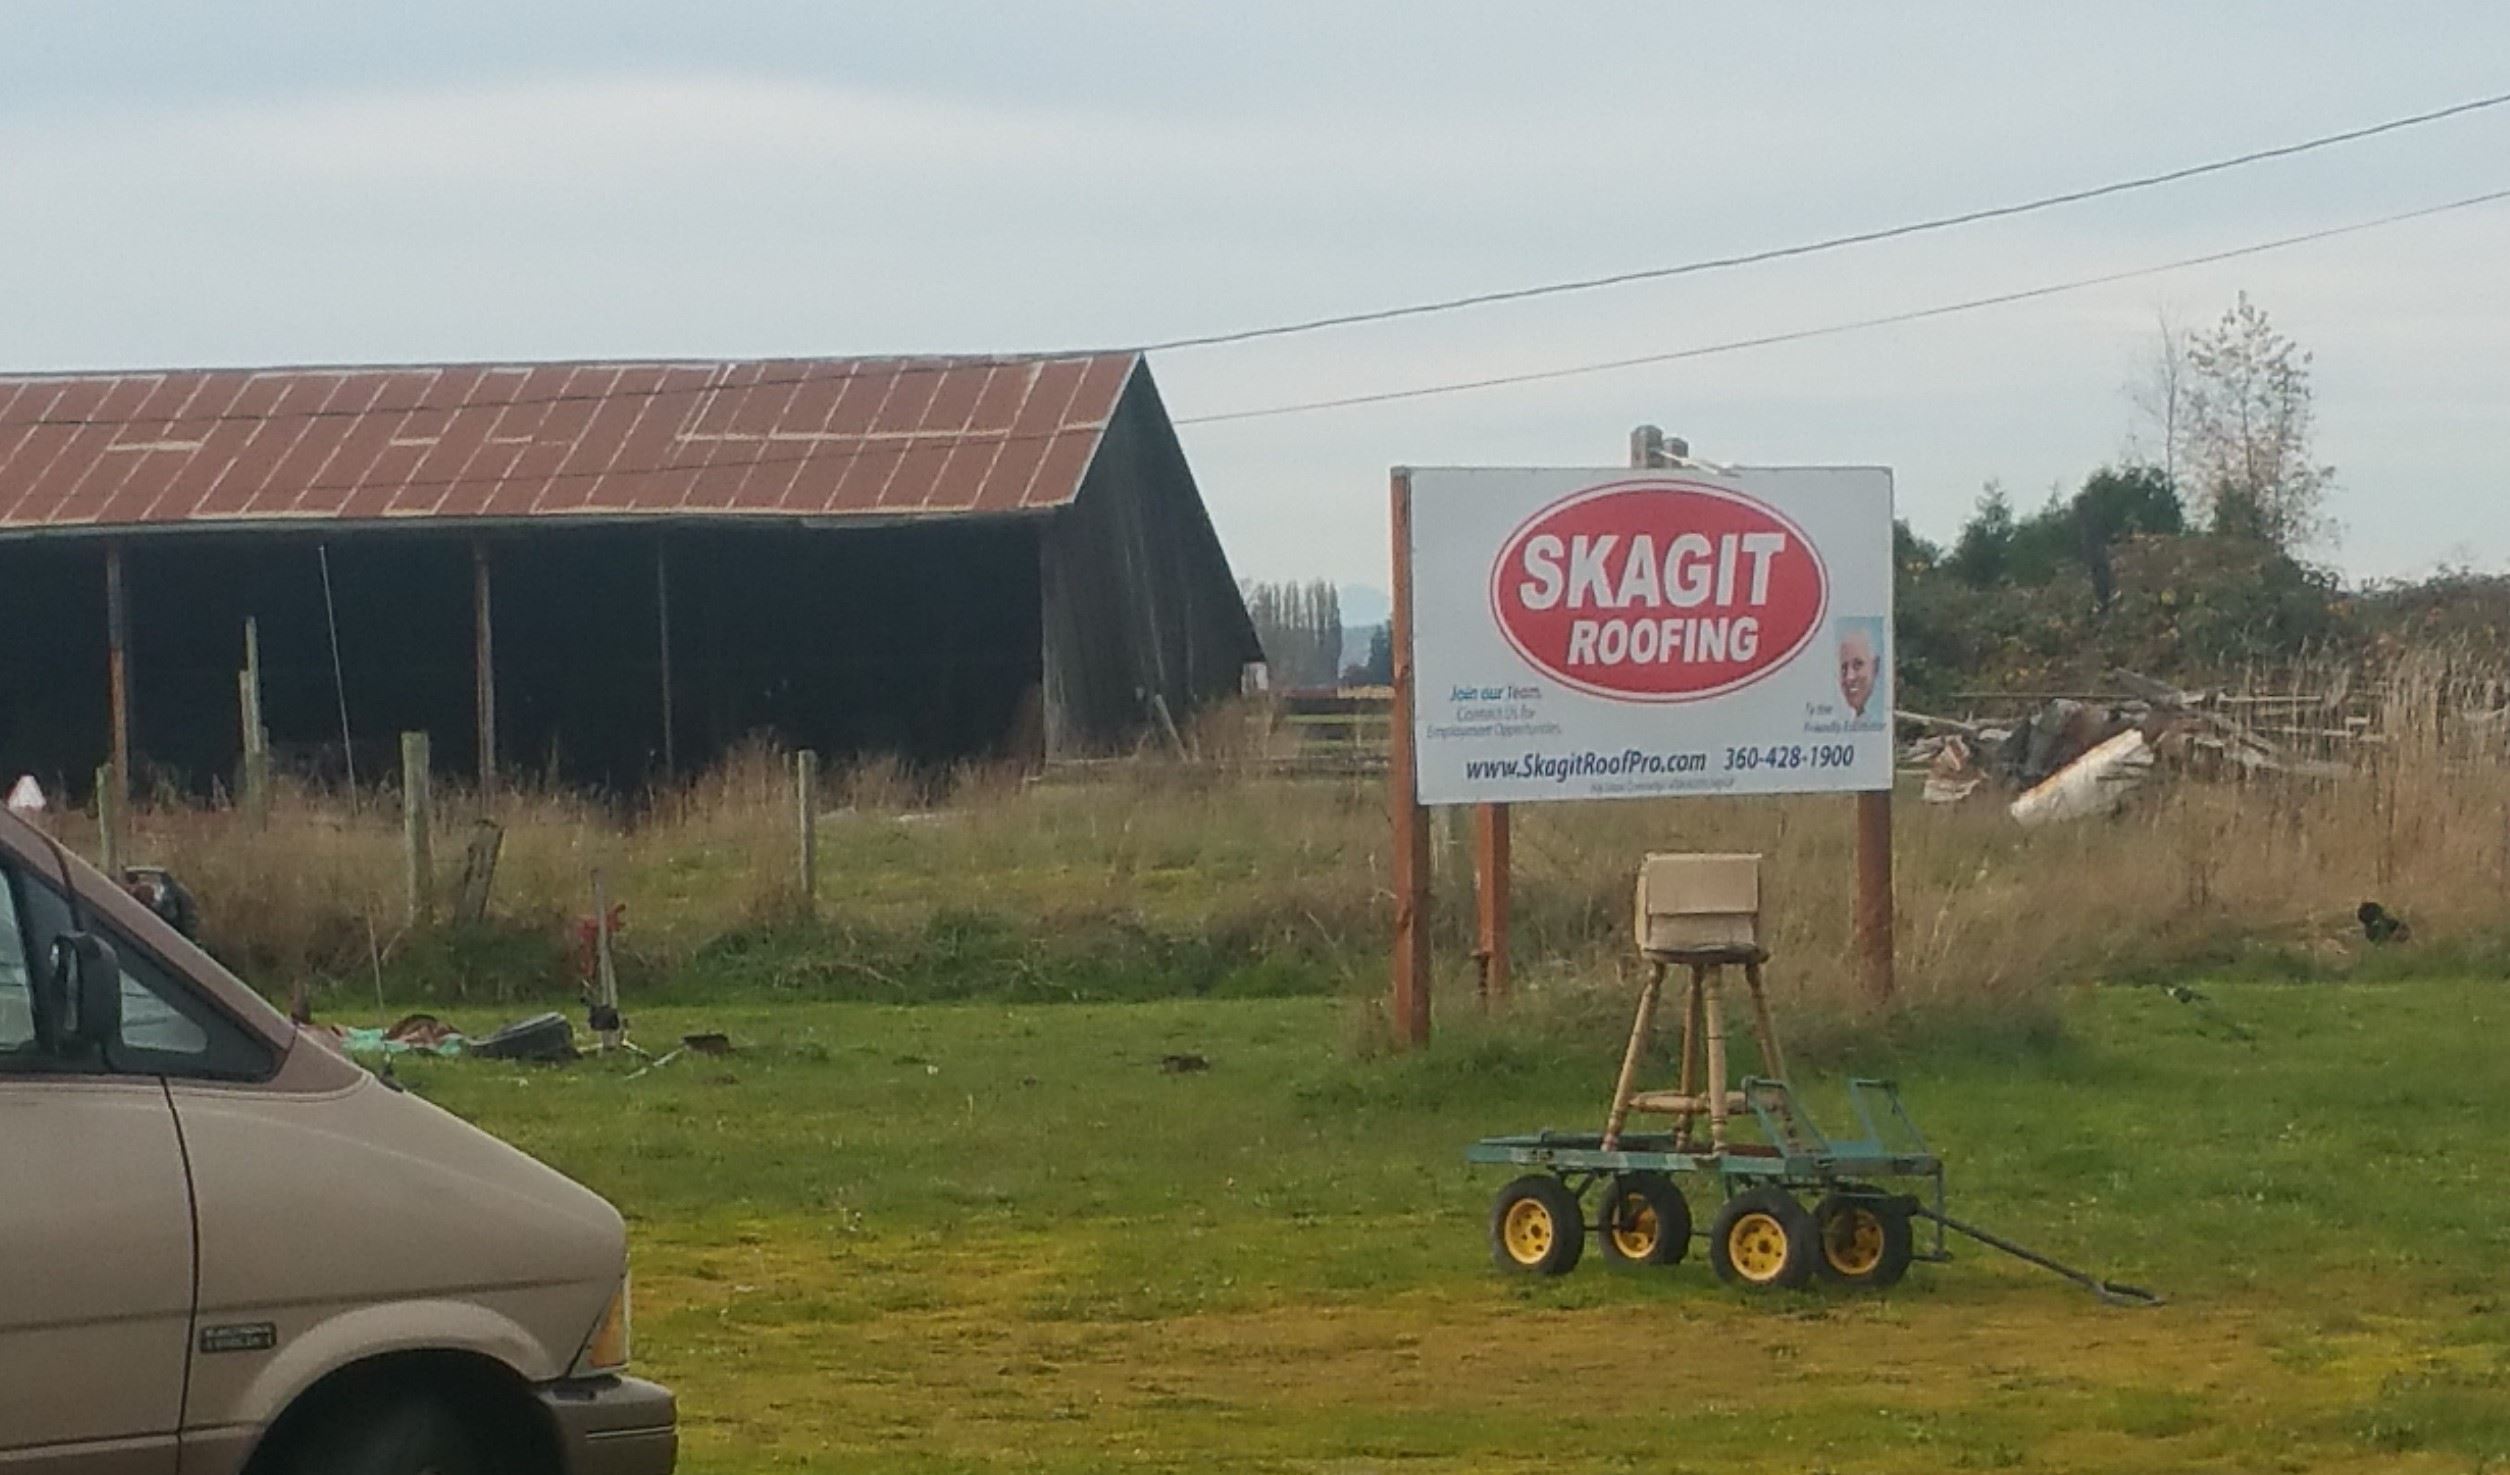 Skagit Roofing Sign